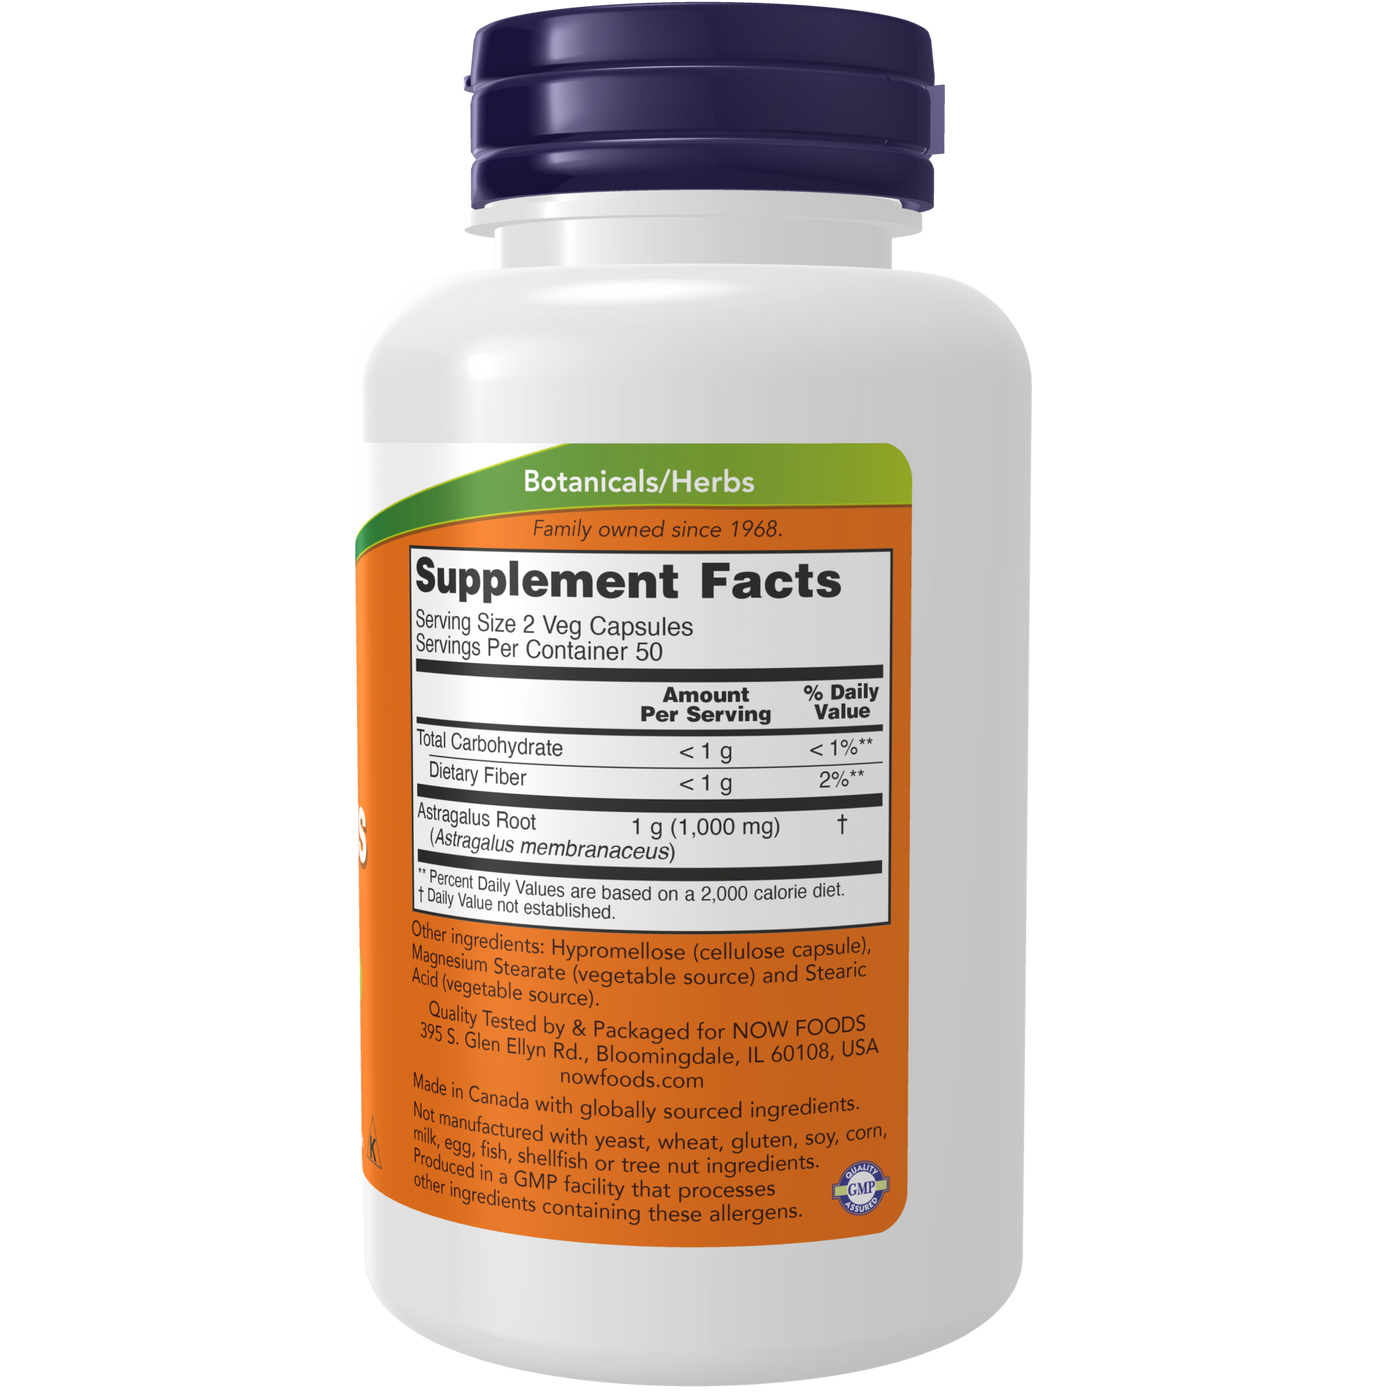 Astragalus 500 mg  Curated Wellness